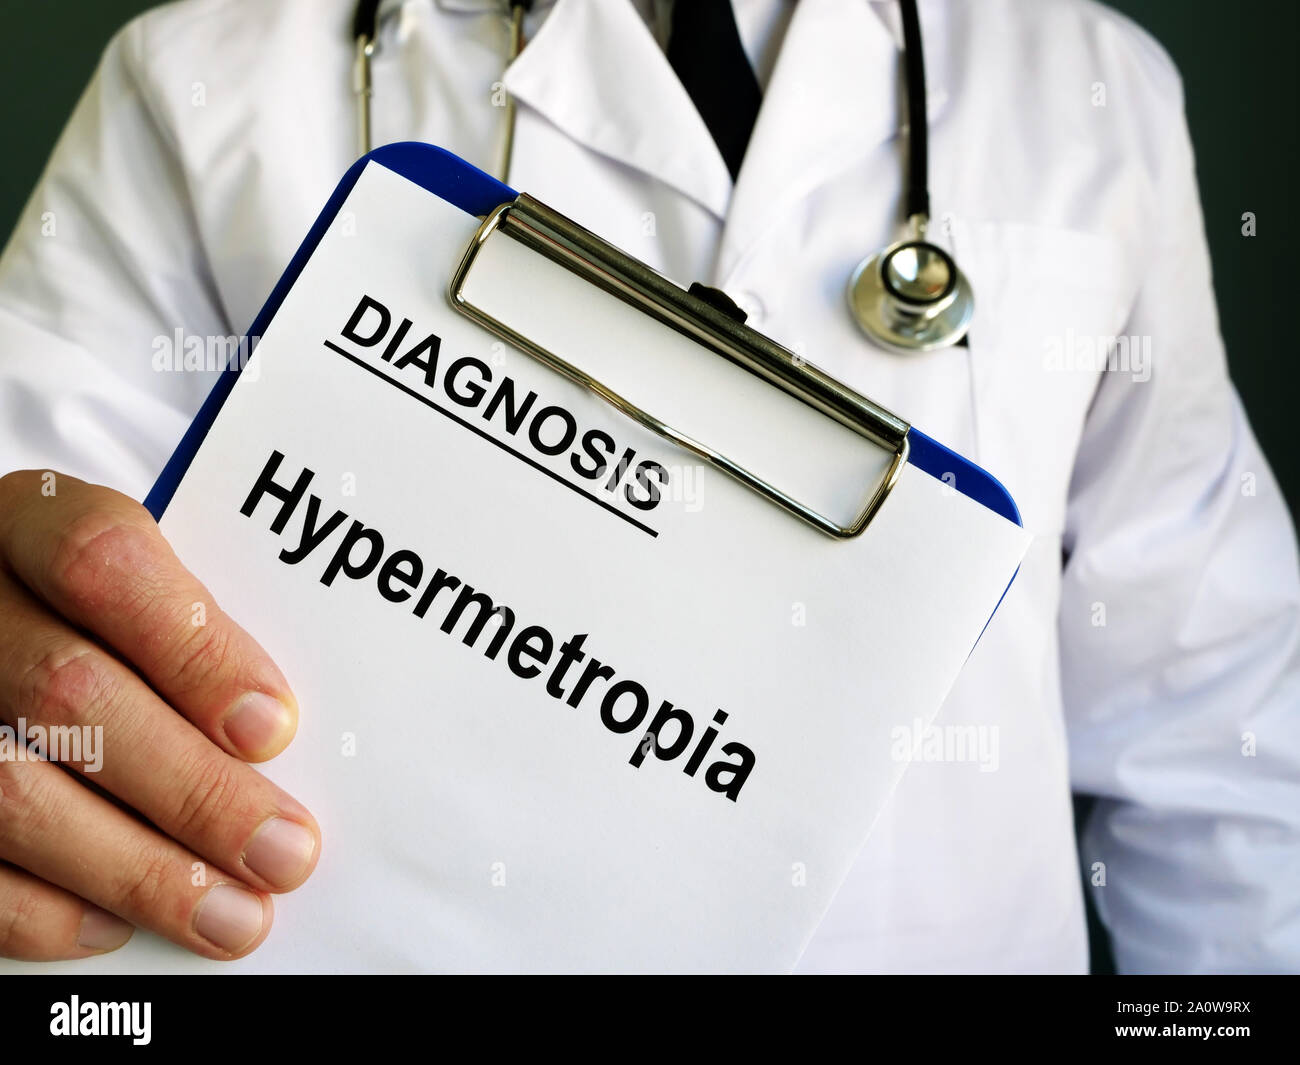 Hypermetropia or longsightedness diagnosis in the medical form. Stock Photo